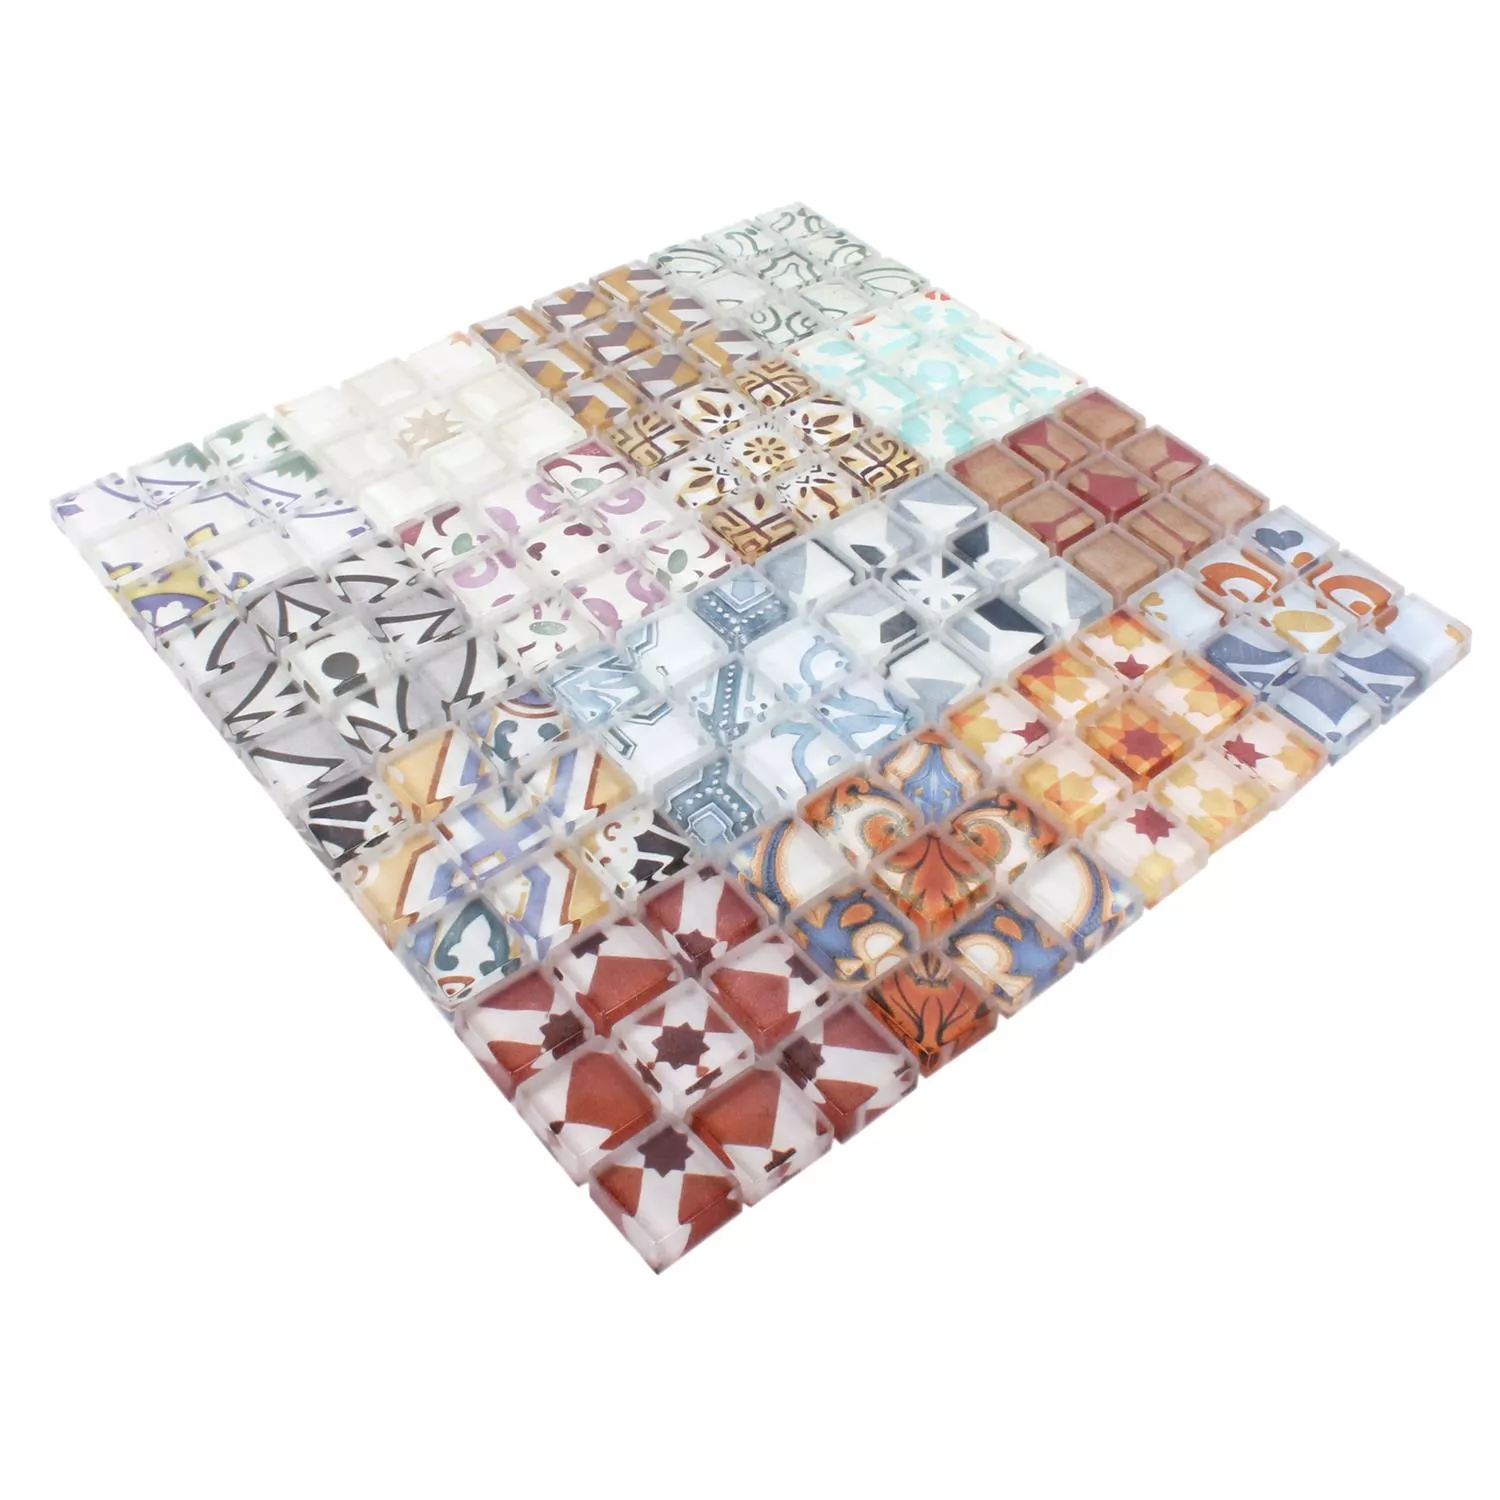 Sample Mosaic Tiles Glass Inspiration Colored